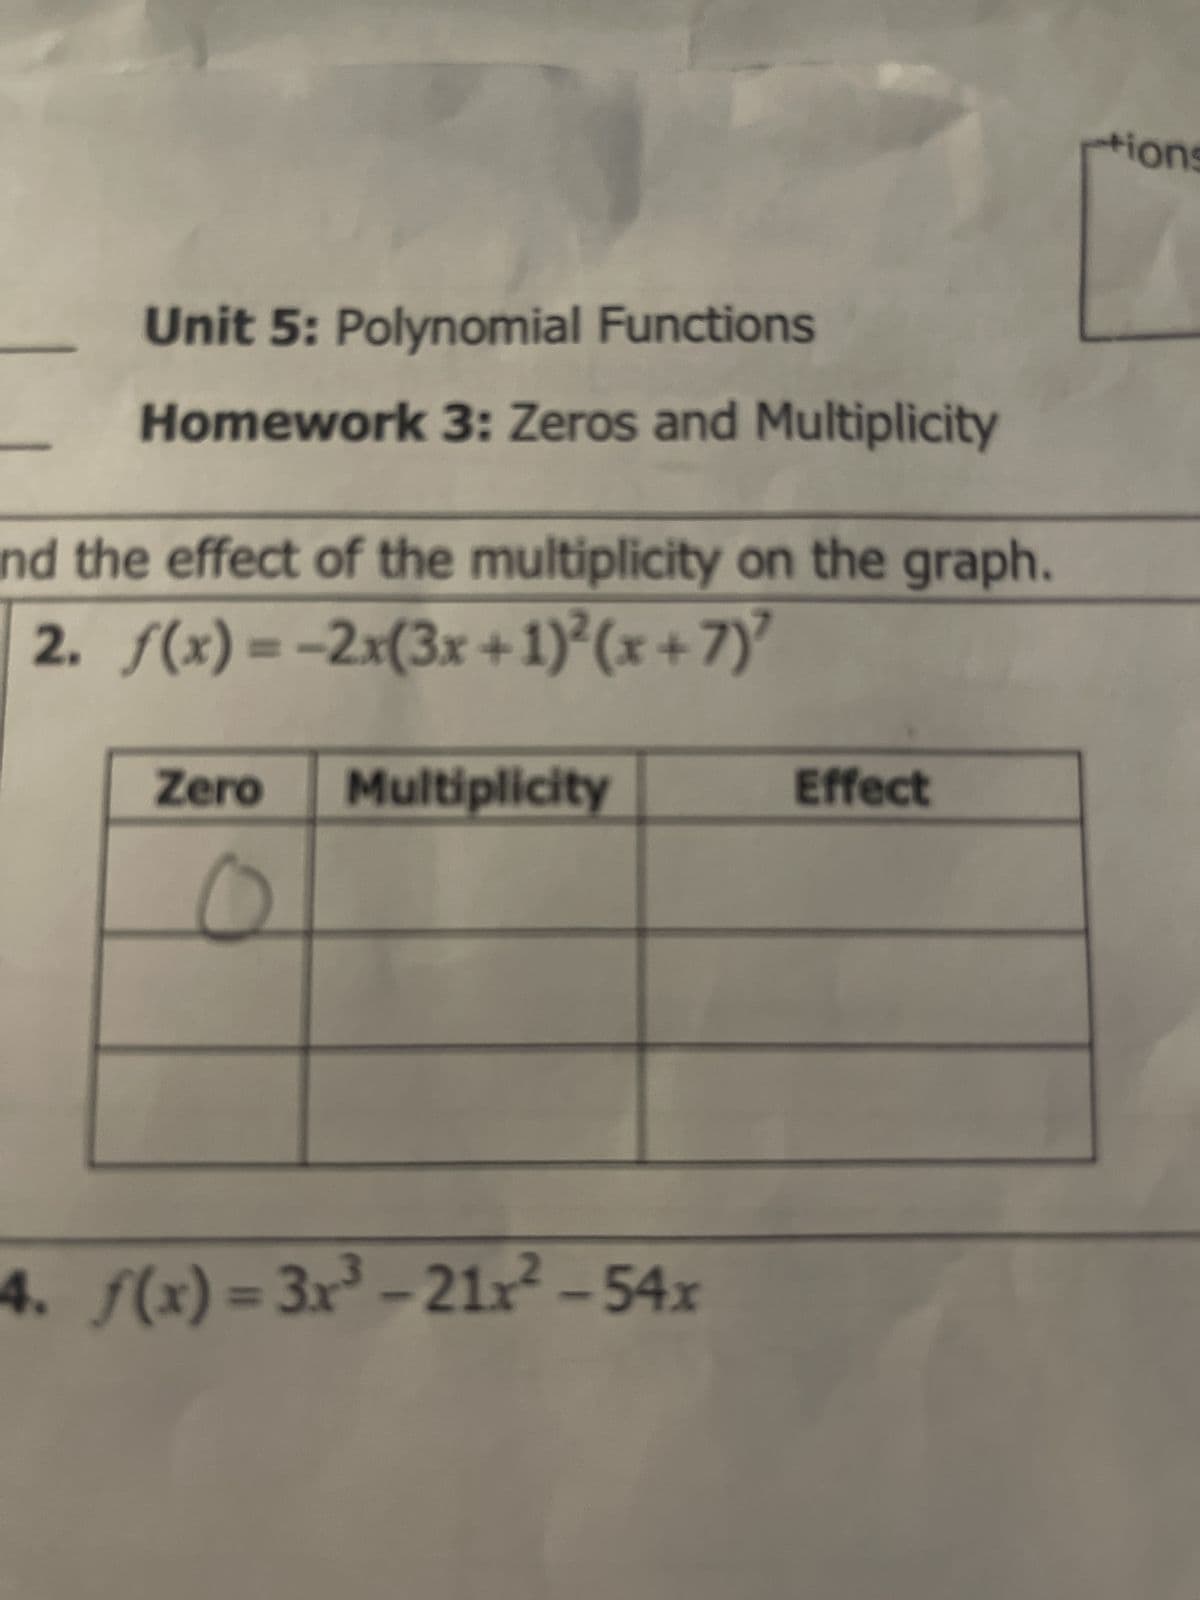 Unit 5: Polynomial Functions
Homework 3: Zeros and Multiplicity
nd the effect of the multiplicity on the graph.
2. f(x)=-2x(3x+1)2(x+7)'
Zero
Multiplicity
Effect
4. f(x)=3x³-21x²-54x
tions